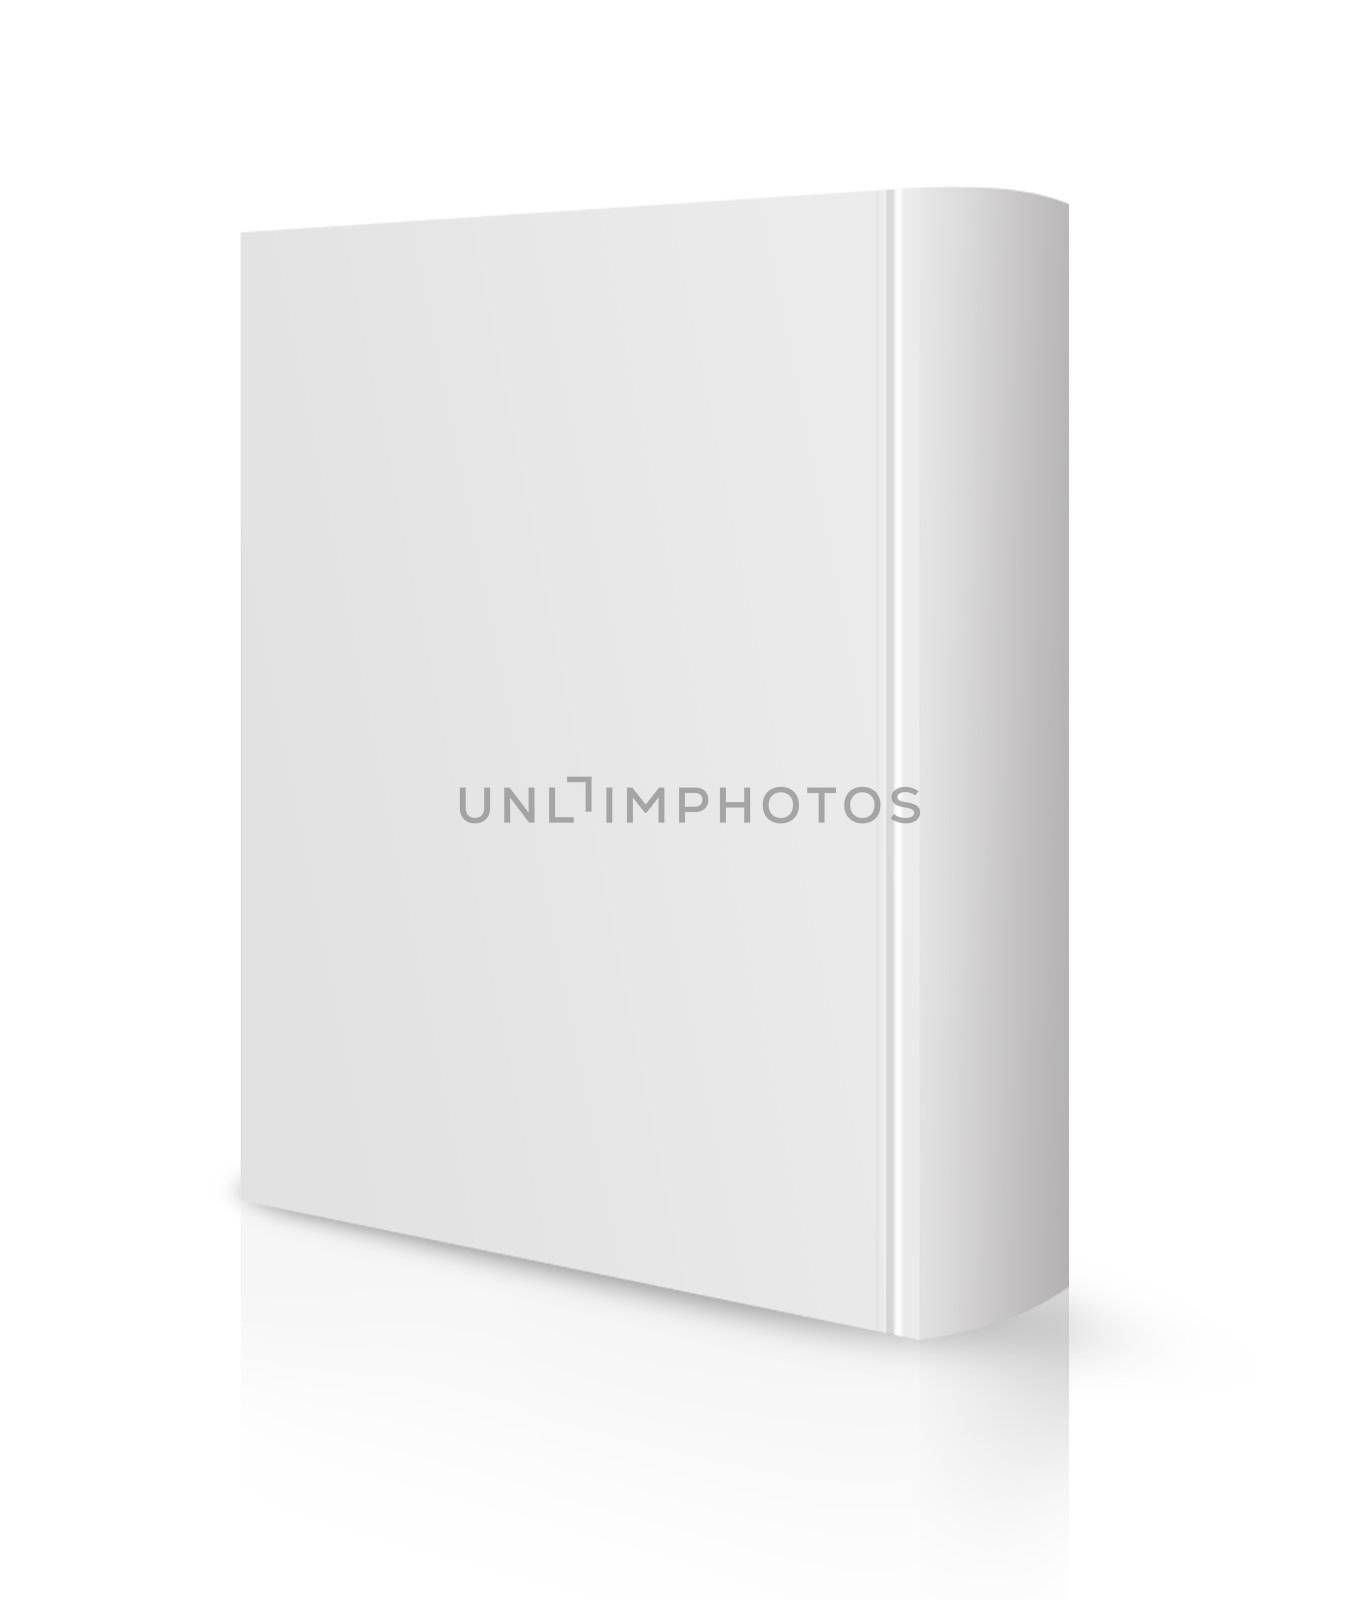 front view of Blank book cover white .